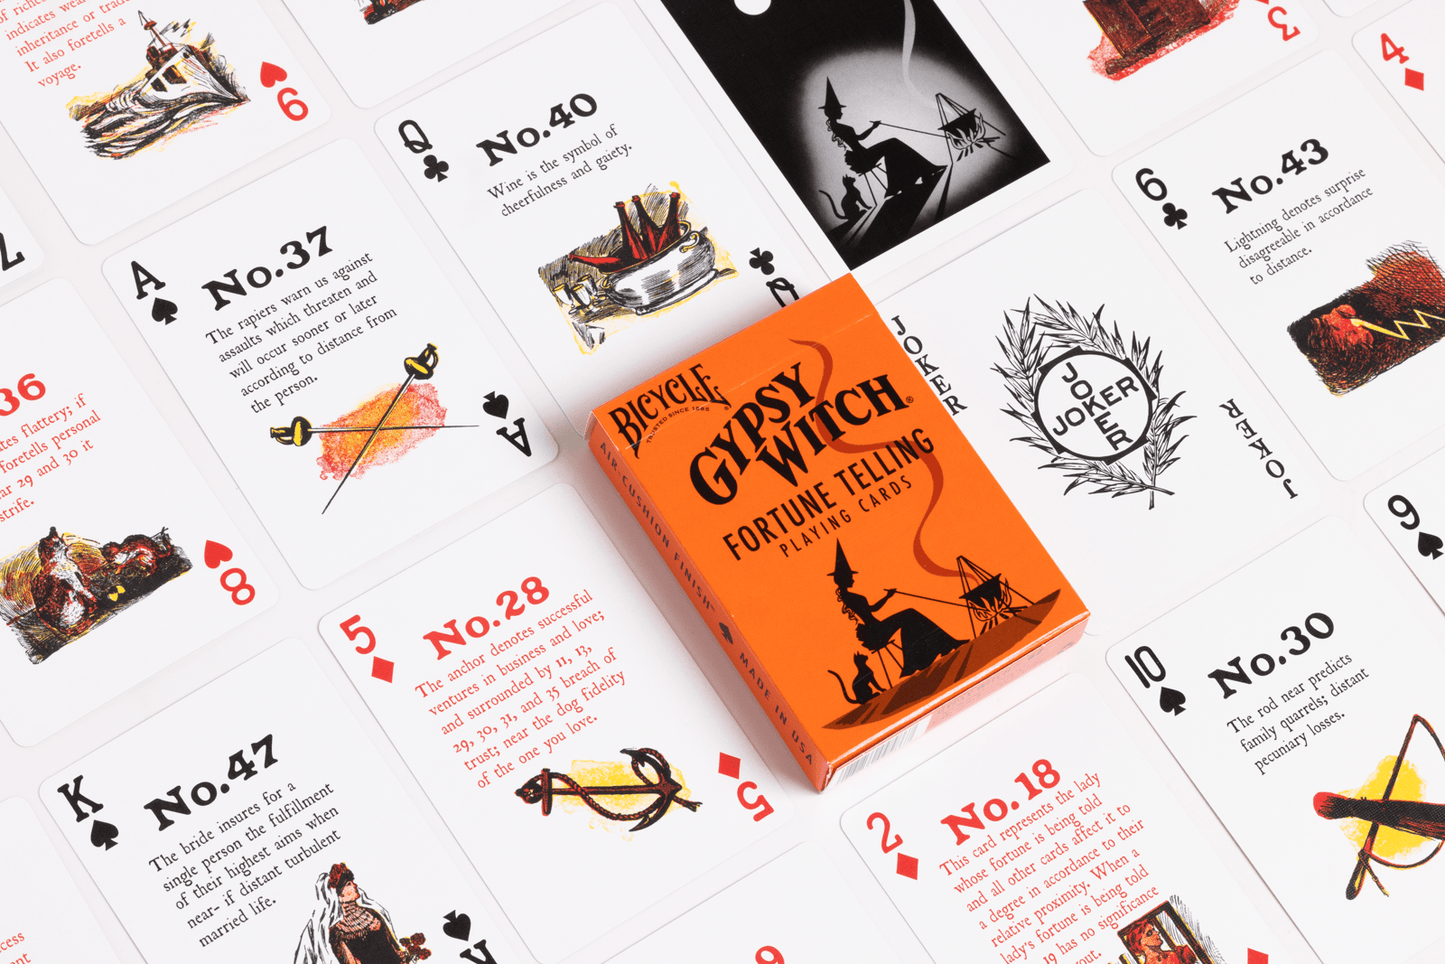 Bicycle Gypsy Witch Fortune Telling Playing Cards